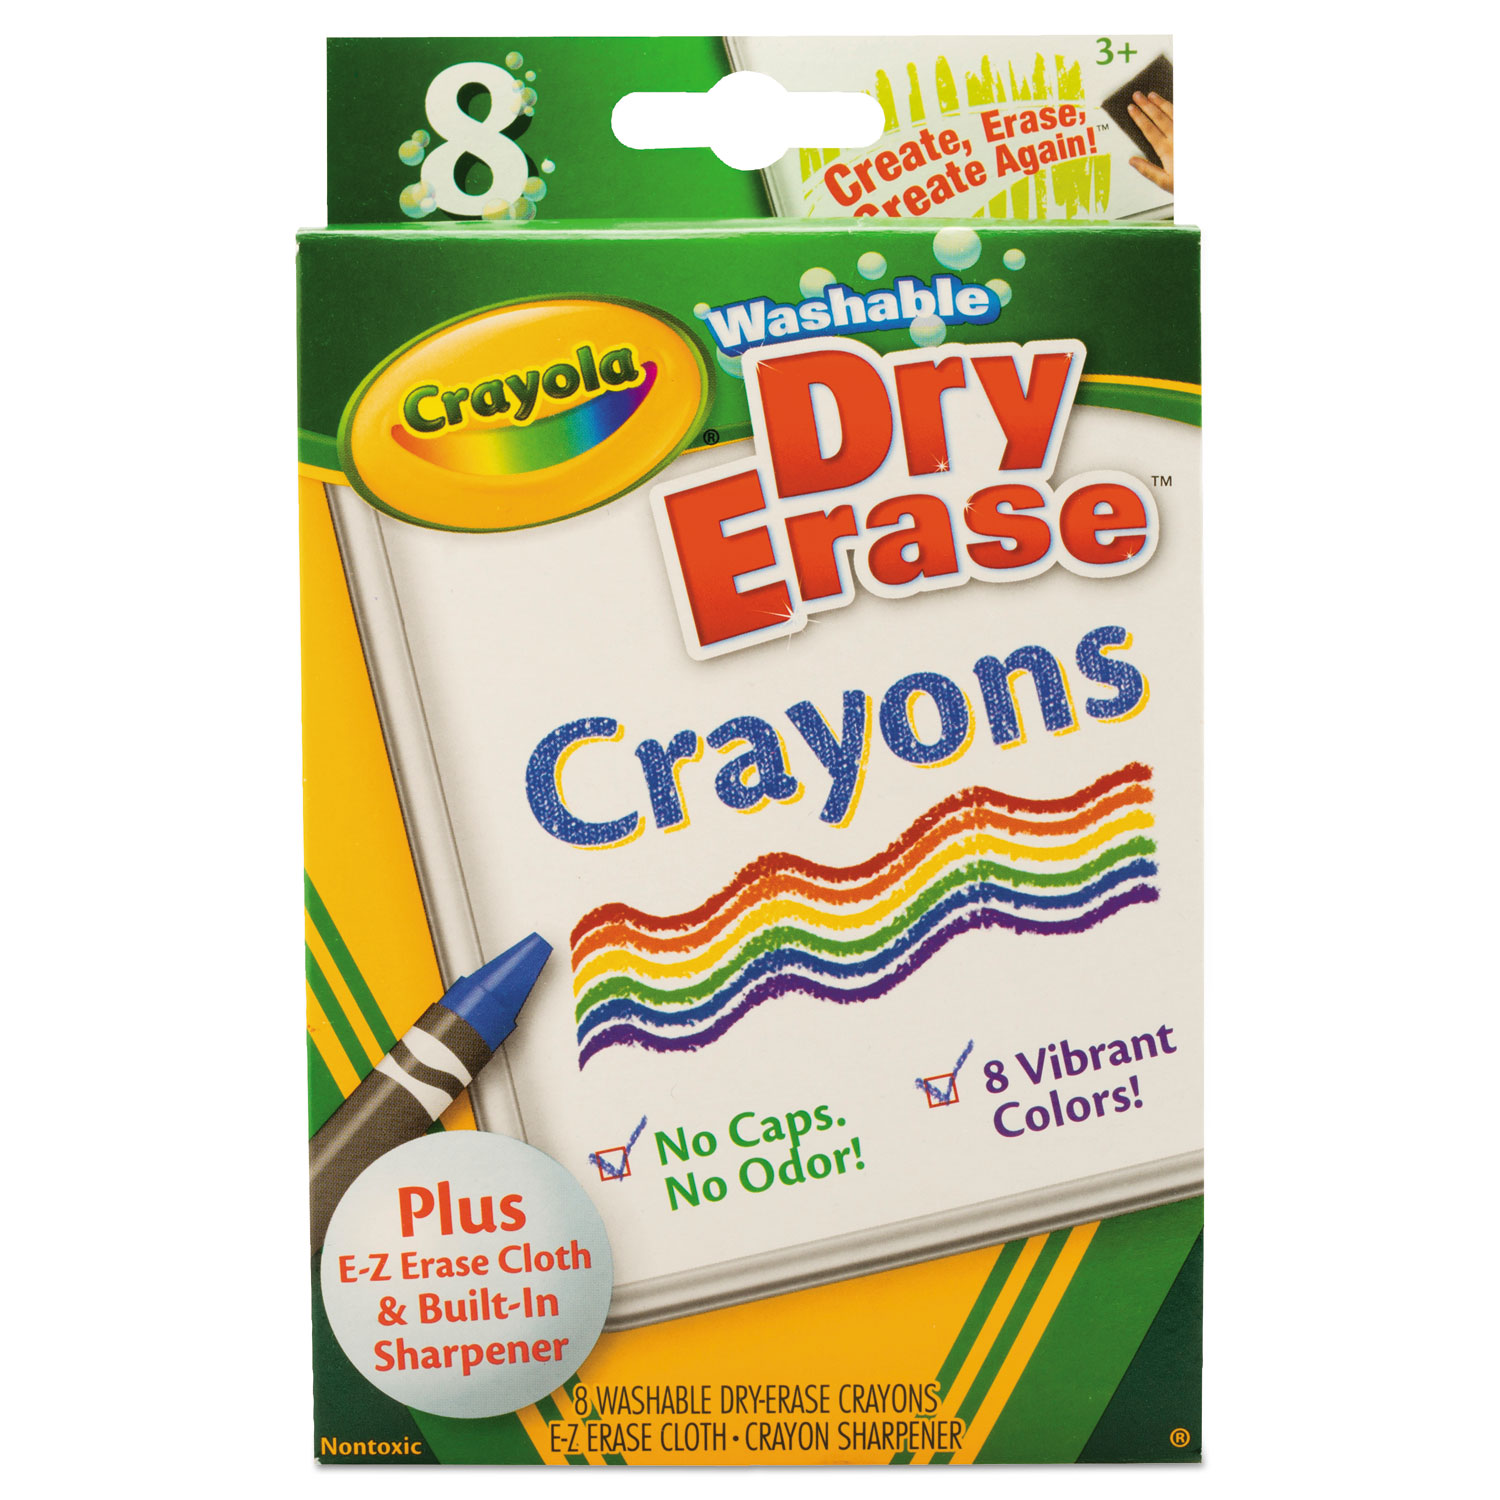  Crayola 98-5200 Washable Dry Erase Crayons w/E-Z Erase Cloth, Assorted Colors, 8/Pack (CYO985200) 